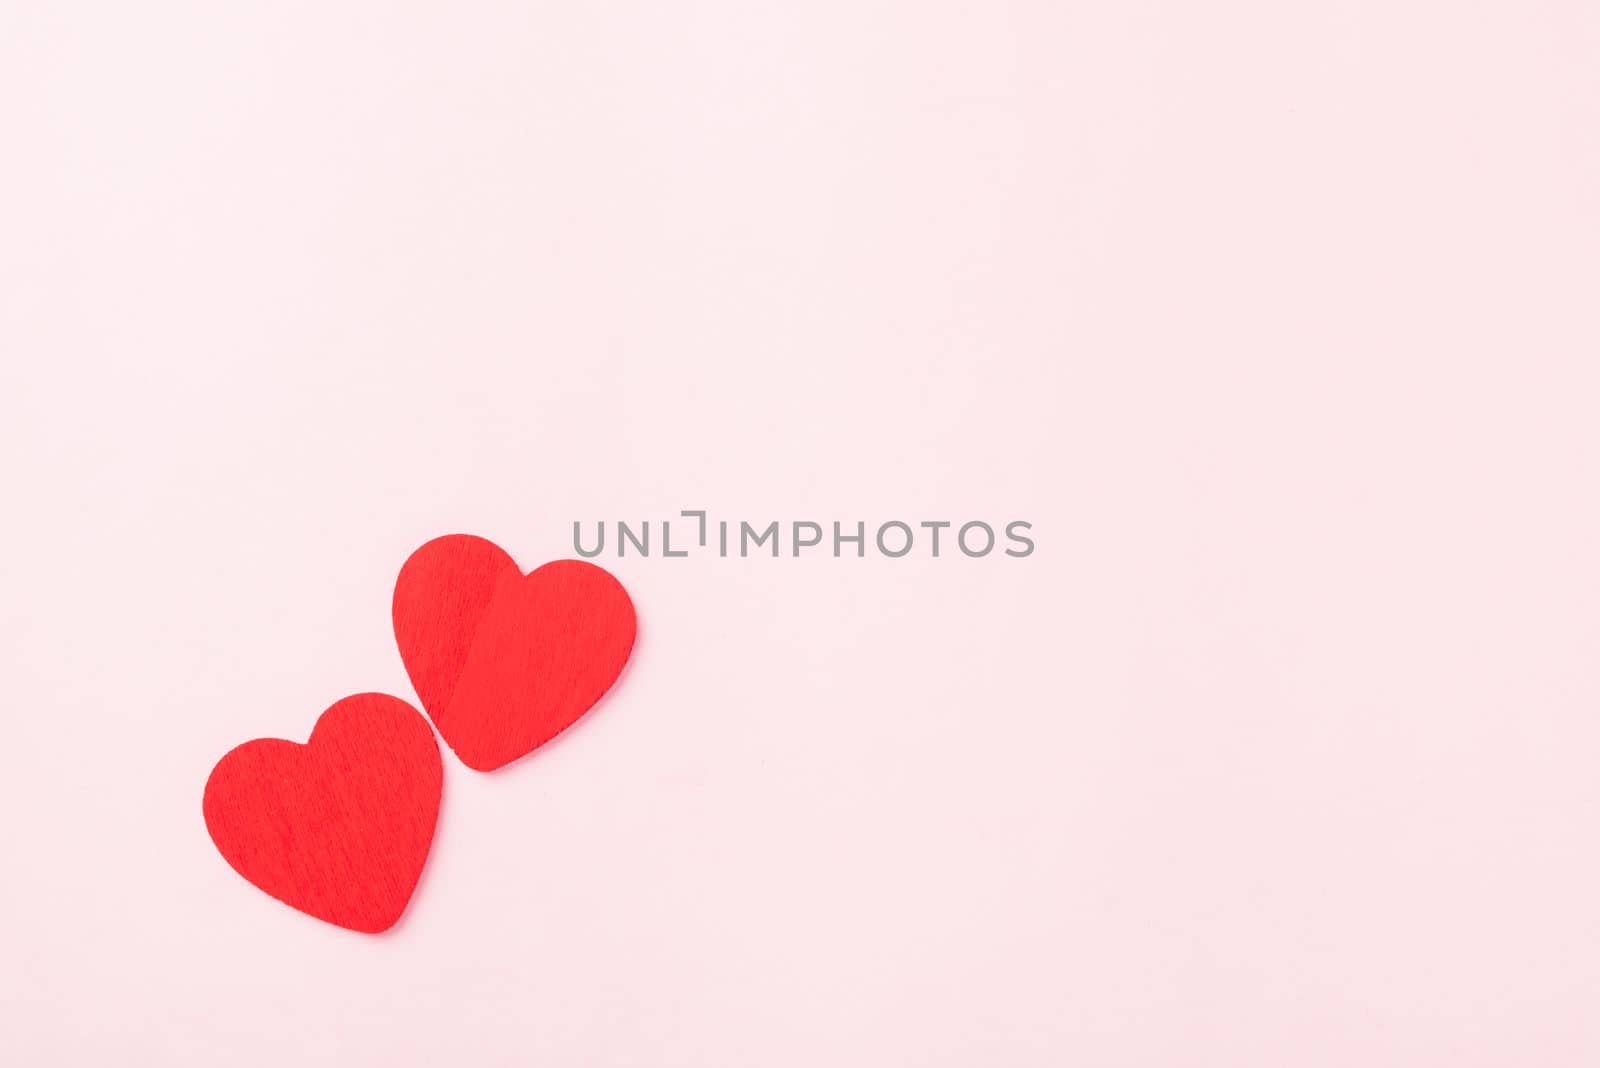 red hearts composition greeting card for love Valentines day concept by Sorapop